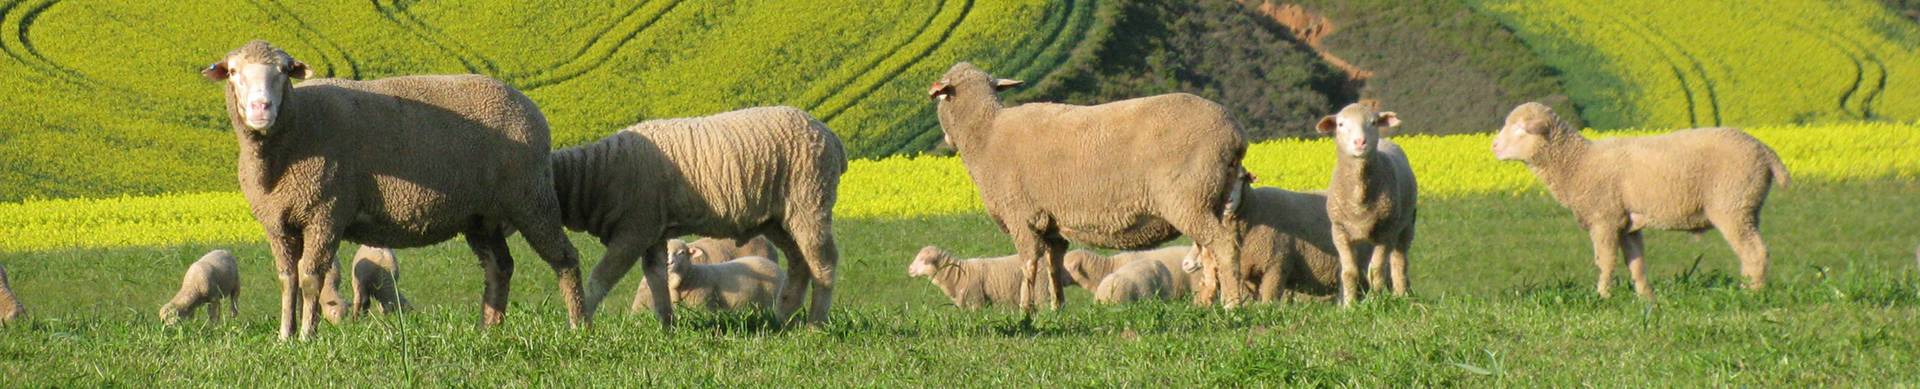 About-the-nwga-wool-growers